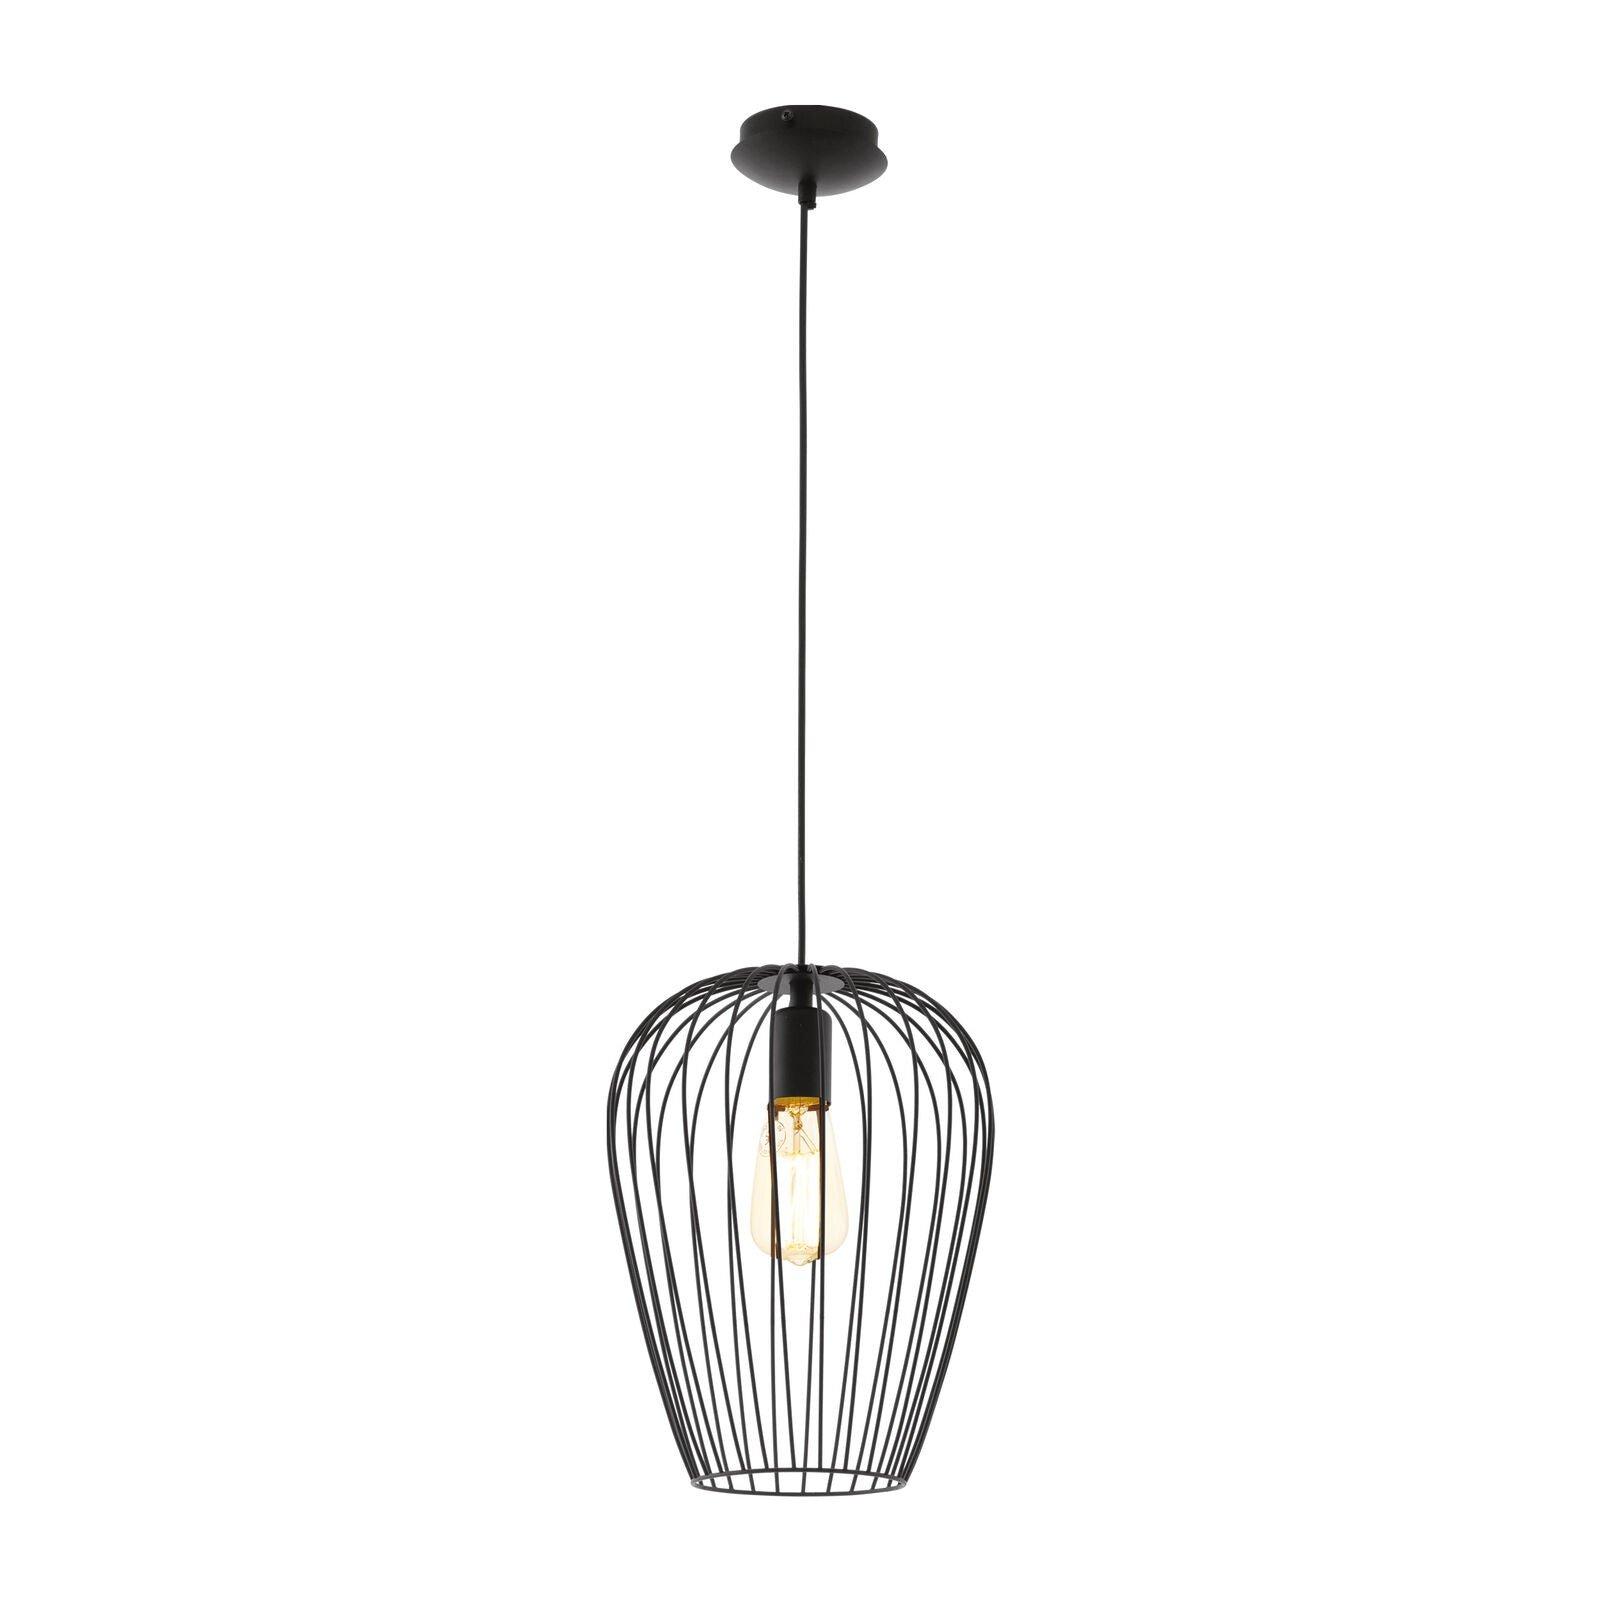 Hanging Ceiling Pendant Light Black Wire Cage 1 x 60W E27 Hallway Feature Lamp